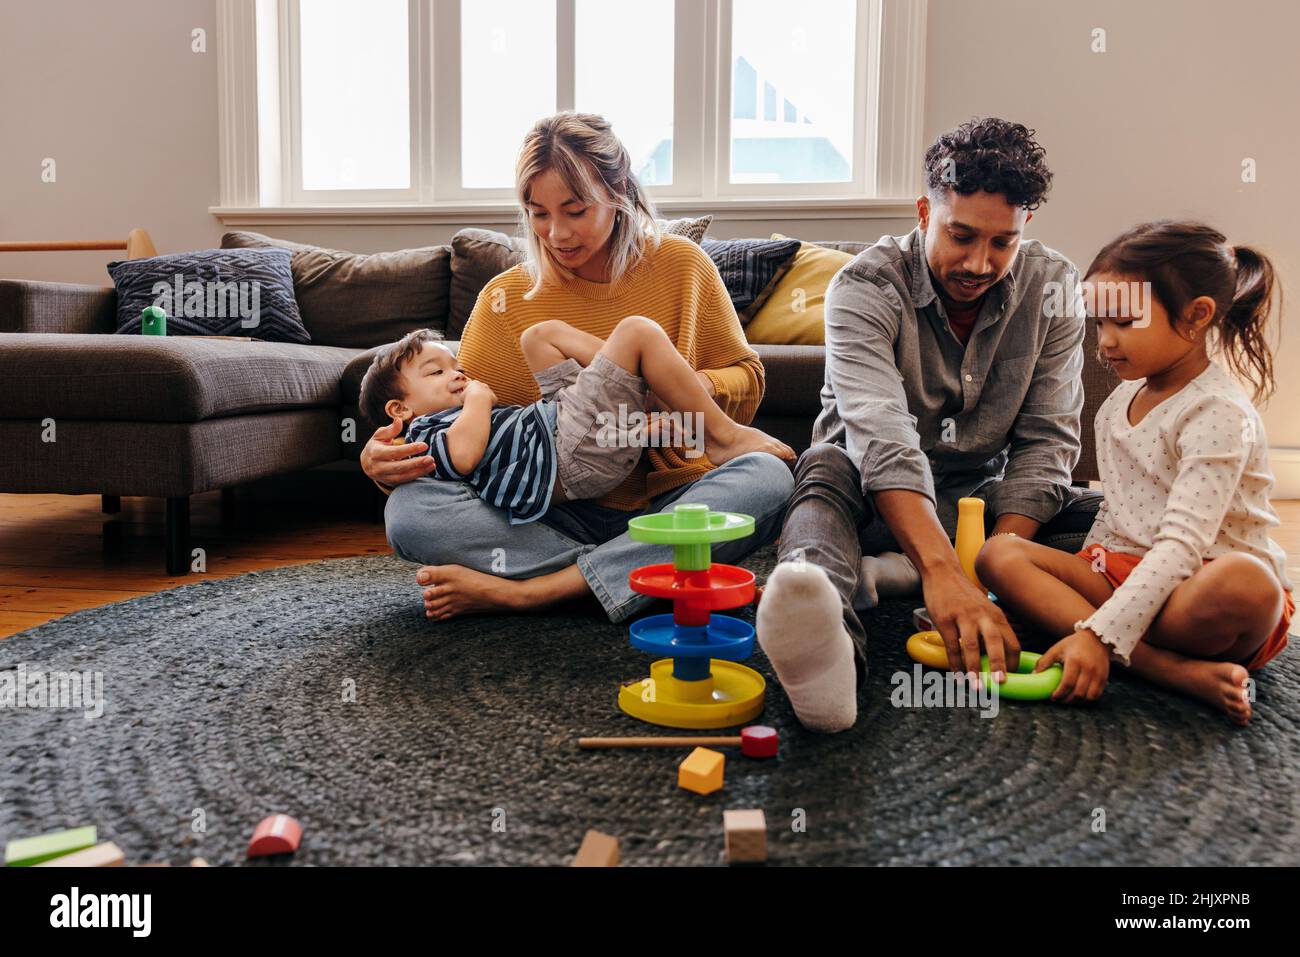 Mom and dad playing with their kids in the living room at home. Two young parents having fun with their son and daughter during playtime. Family of fo Stock Photo